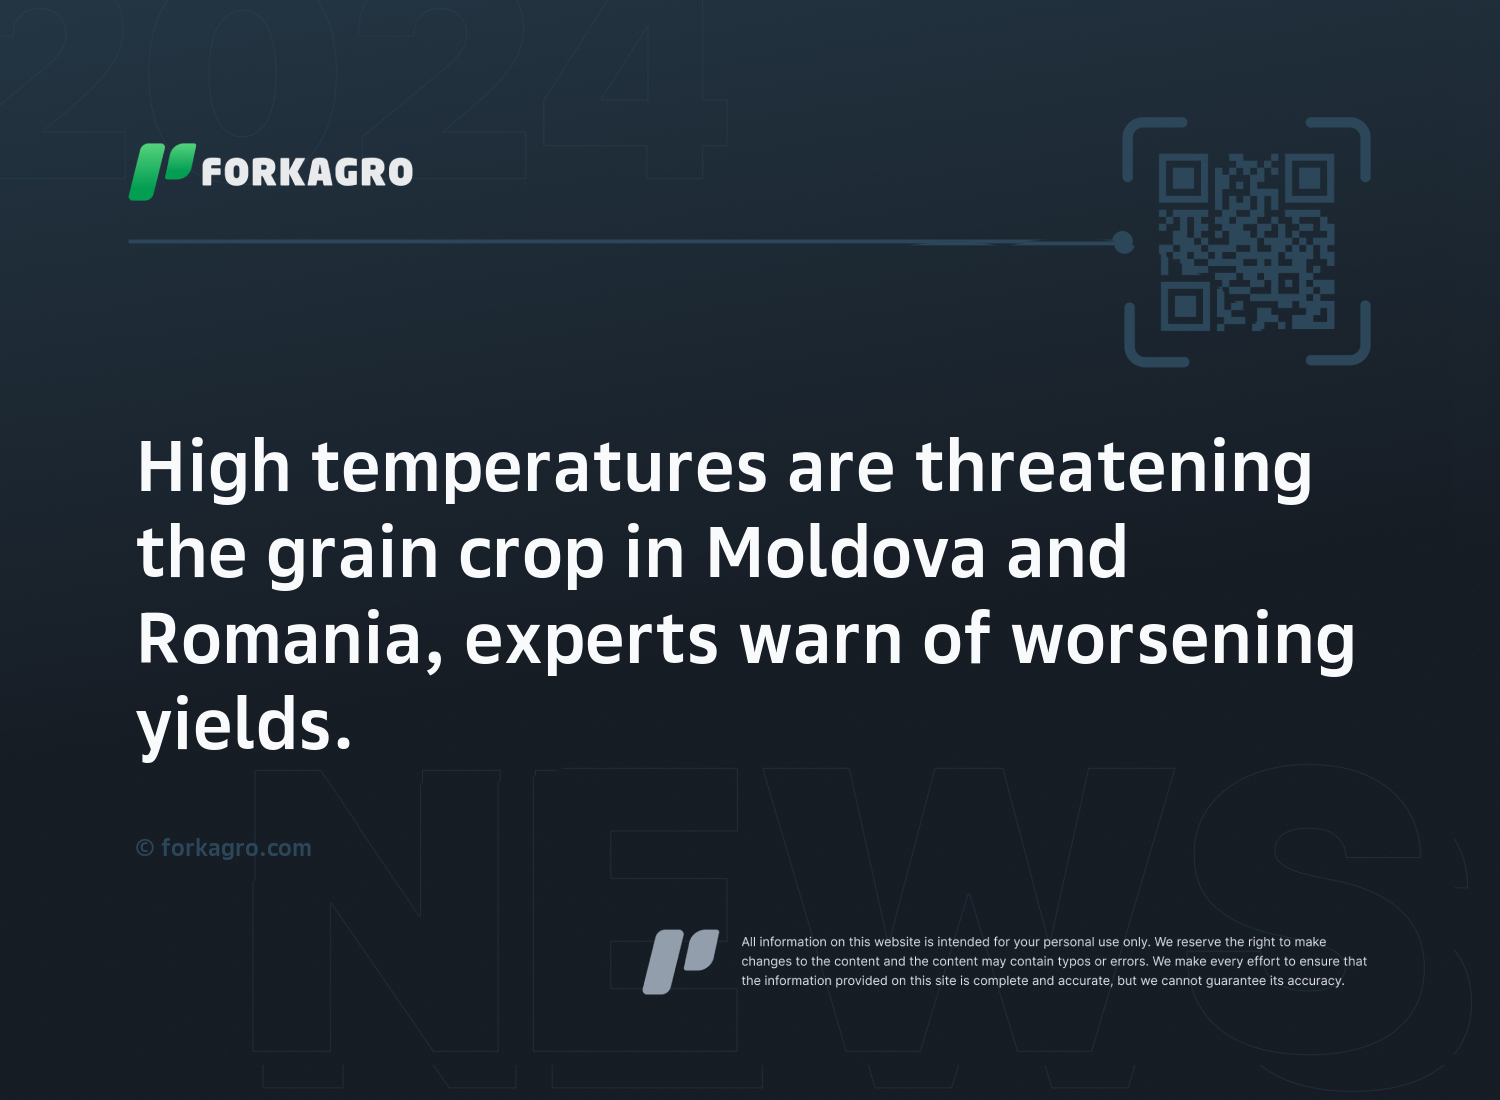 High temperatures are threatening the grain crop in Moldova and Romania, experts warn of worsening yields.